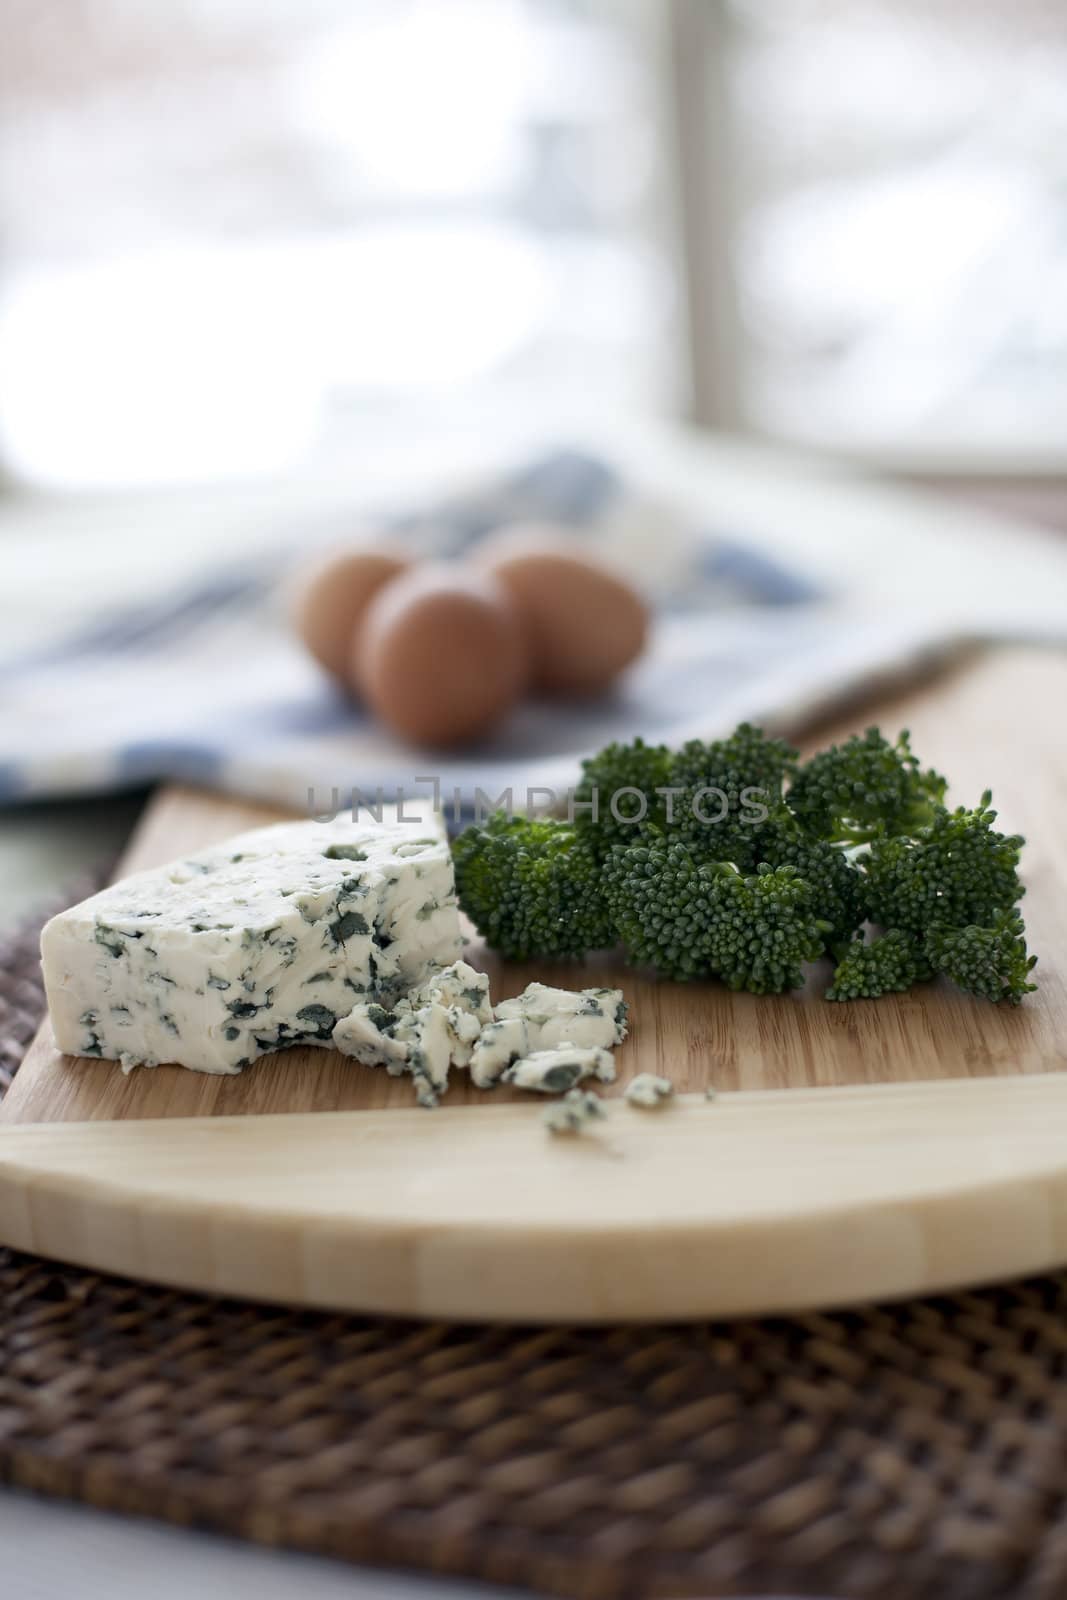 Fresh broccoli, blue cheese, and eggs; ingredients for a quiche.